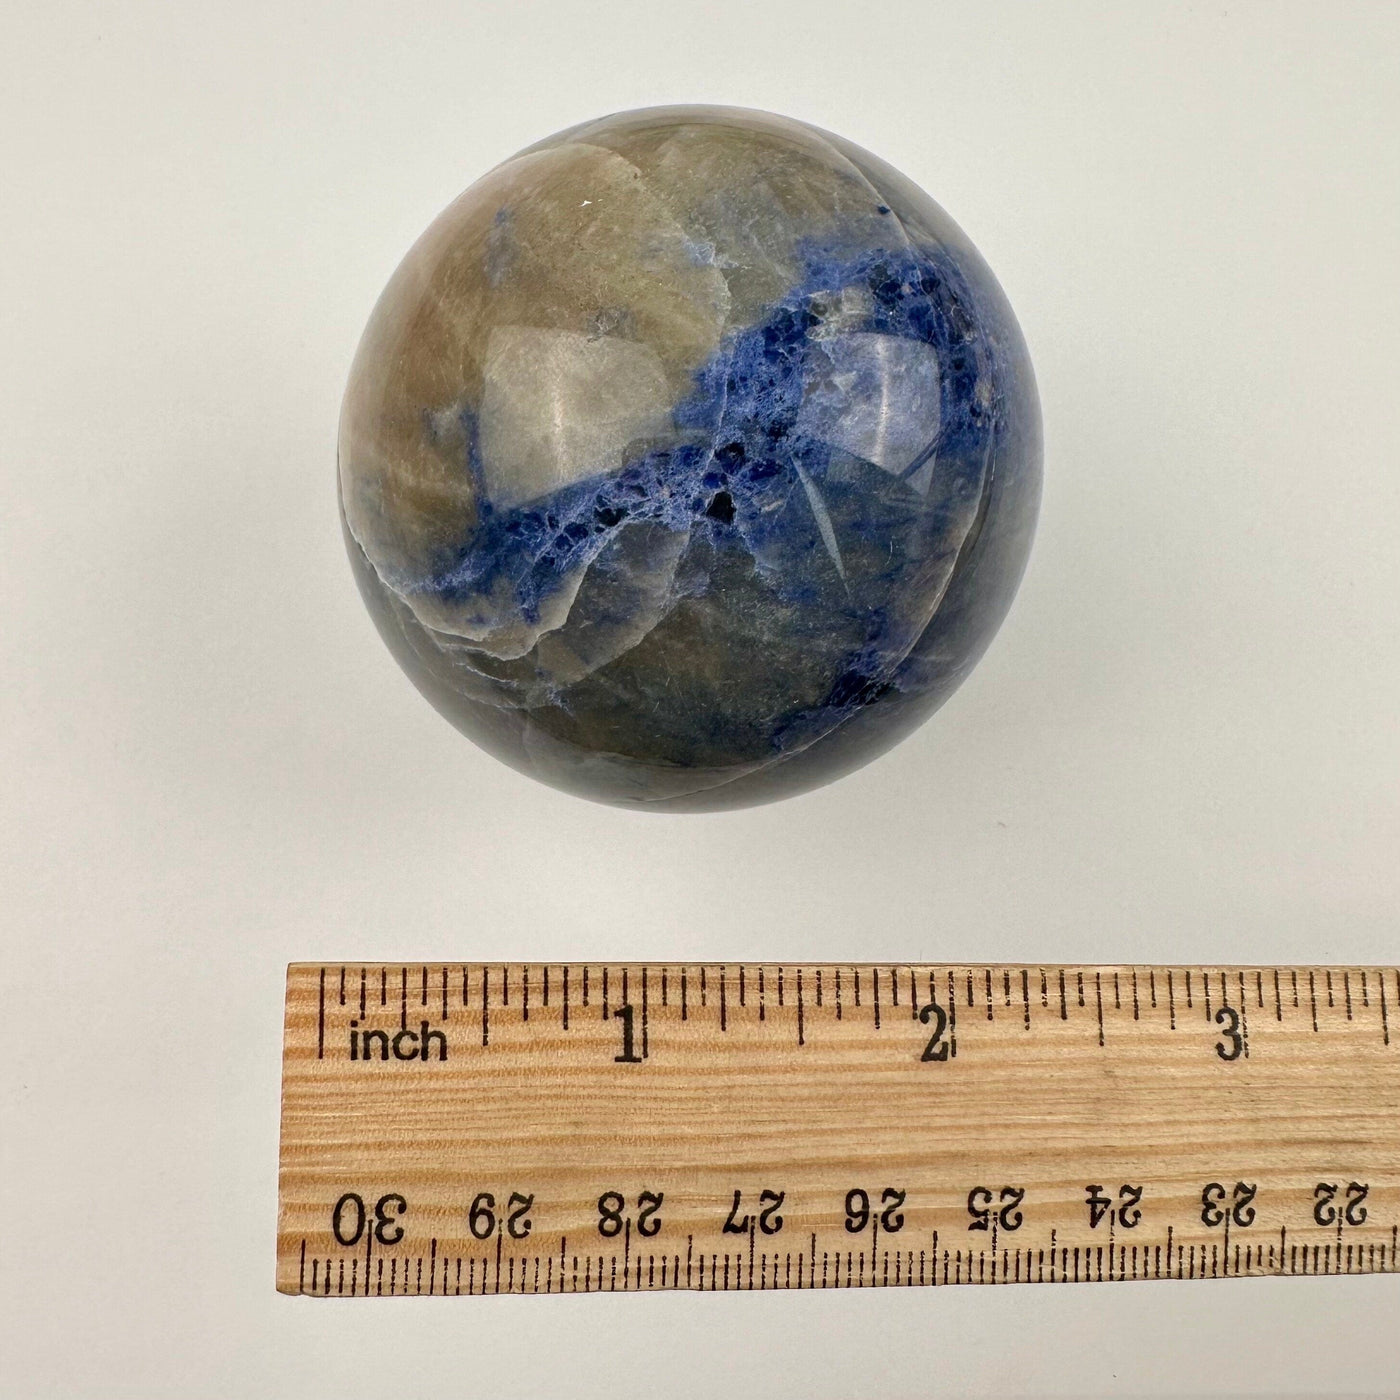 Sodalite Sphere - Crystal Ball - OOAK with ruler for size reference